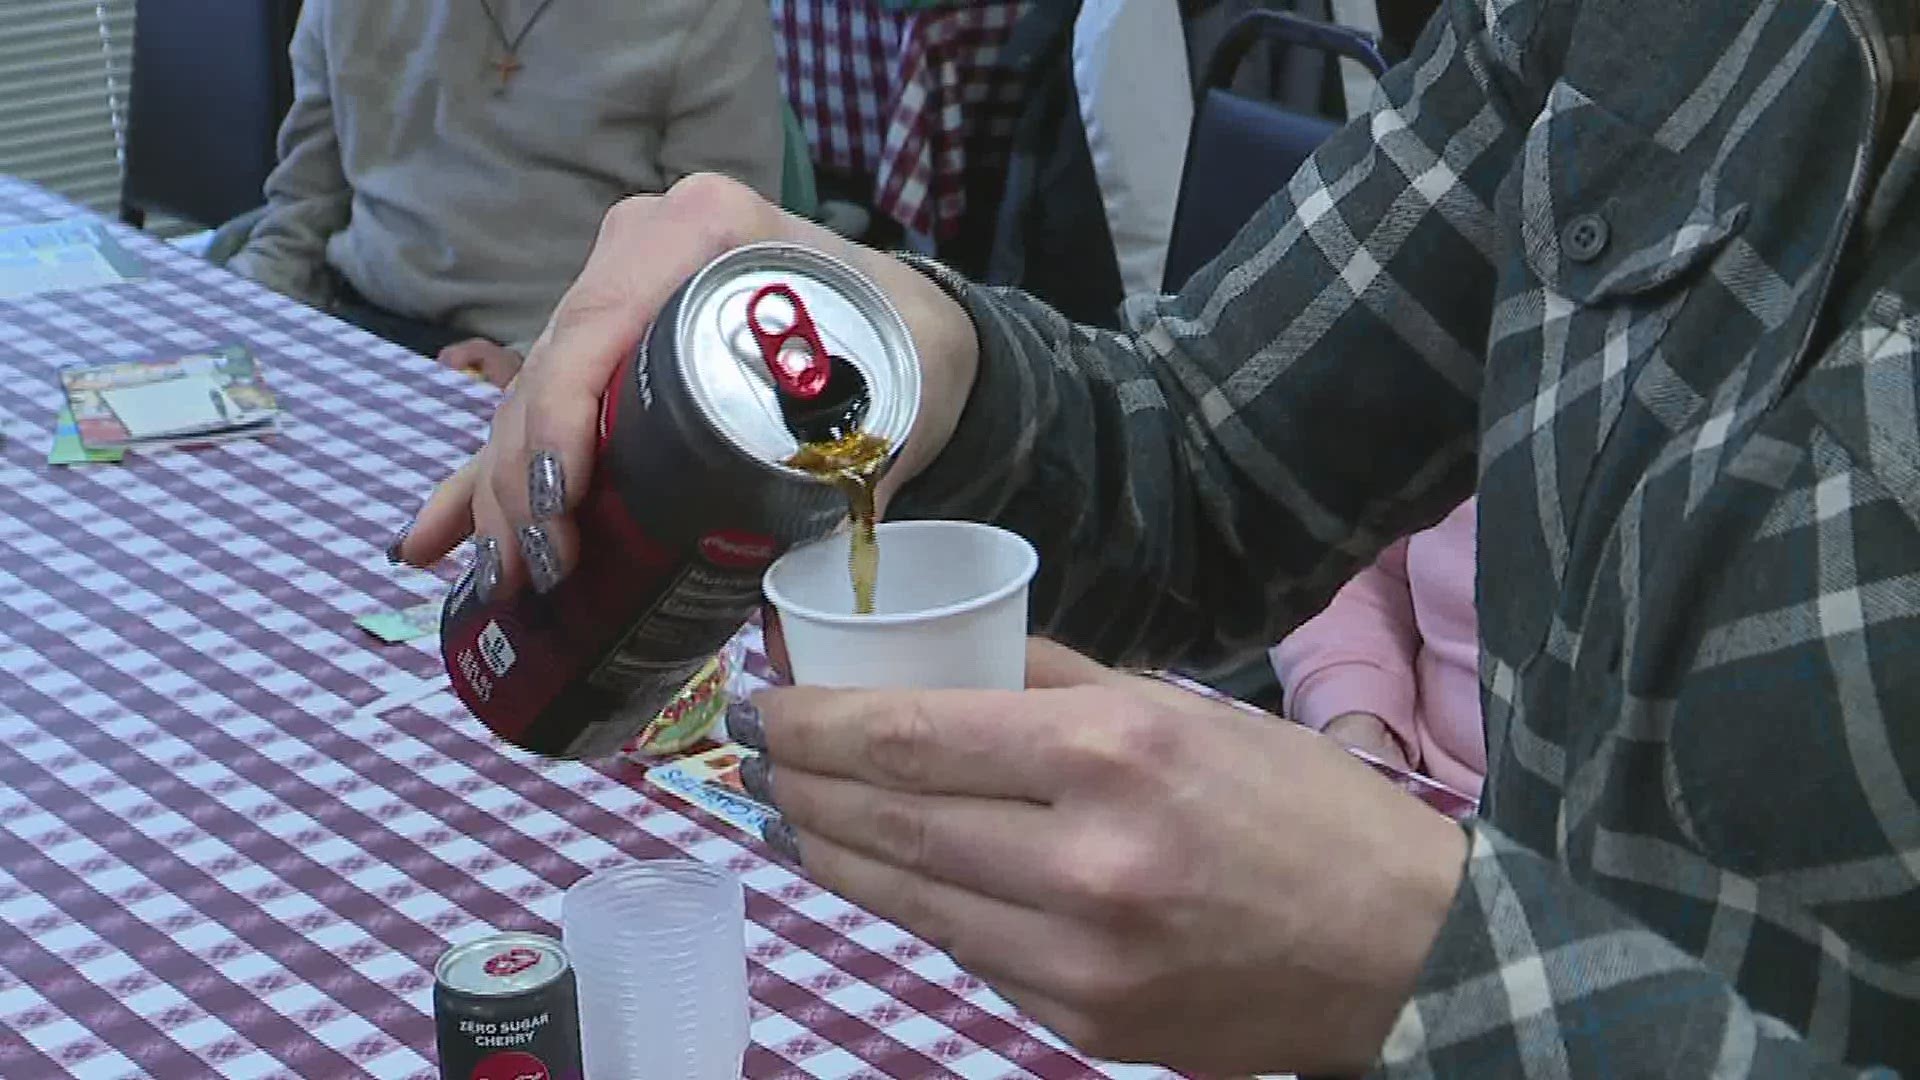 You'll get a bit of a jolt from this week's Taste Test when we test out the newest energy drink from Coca-Cola.